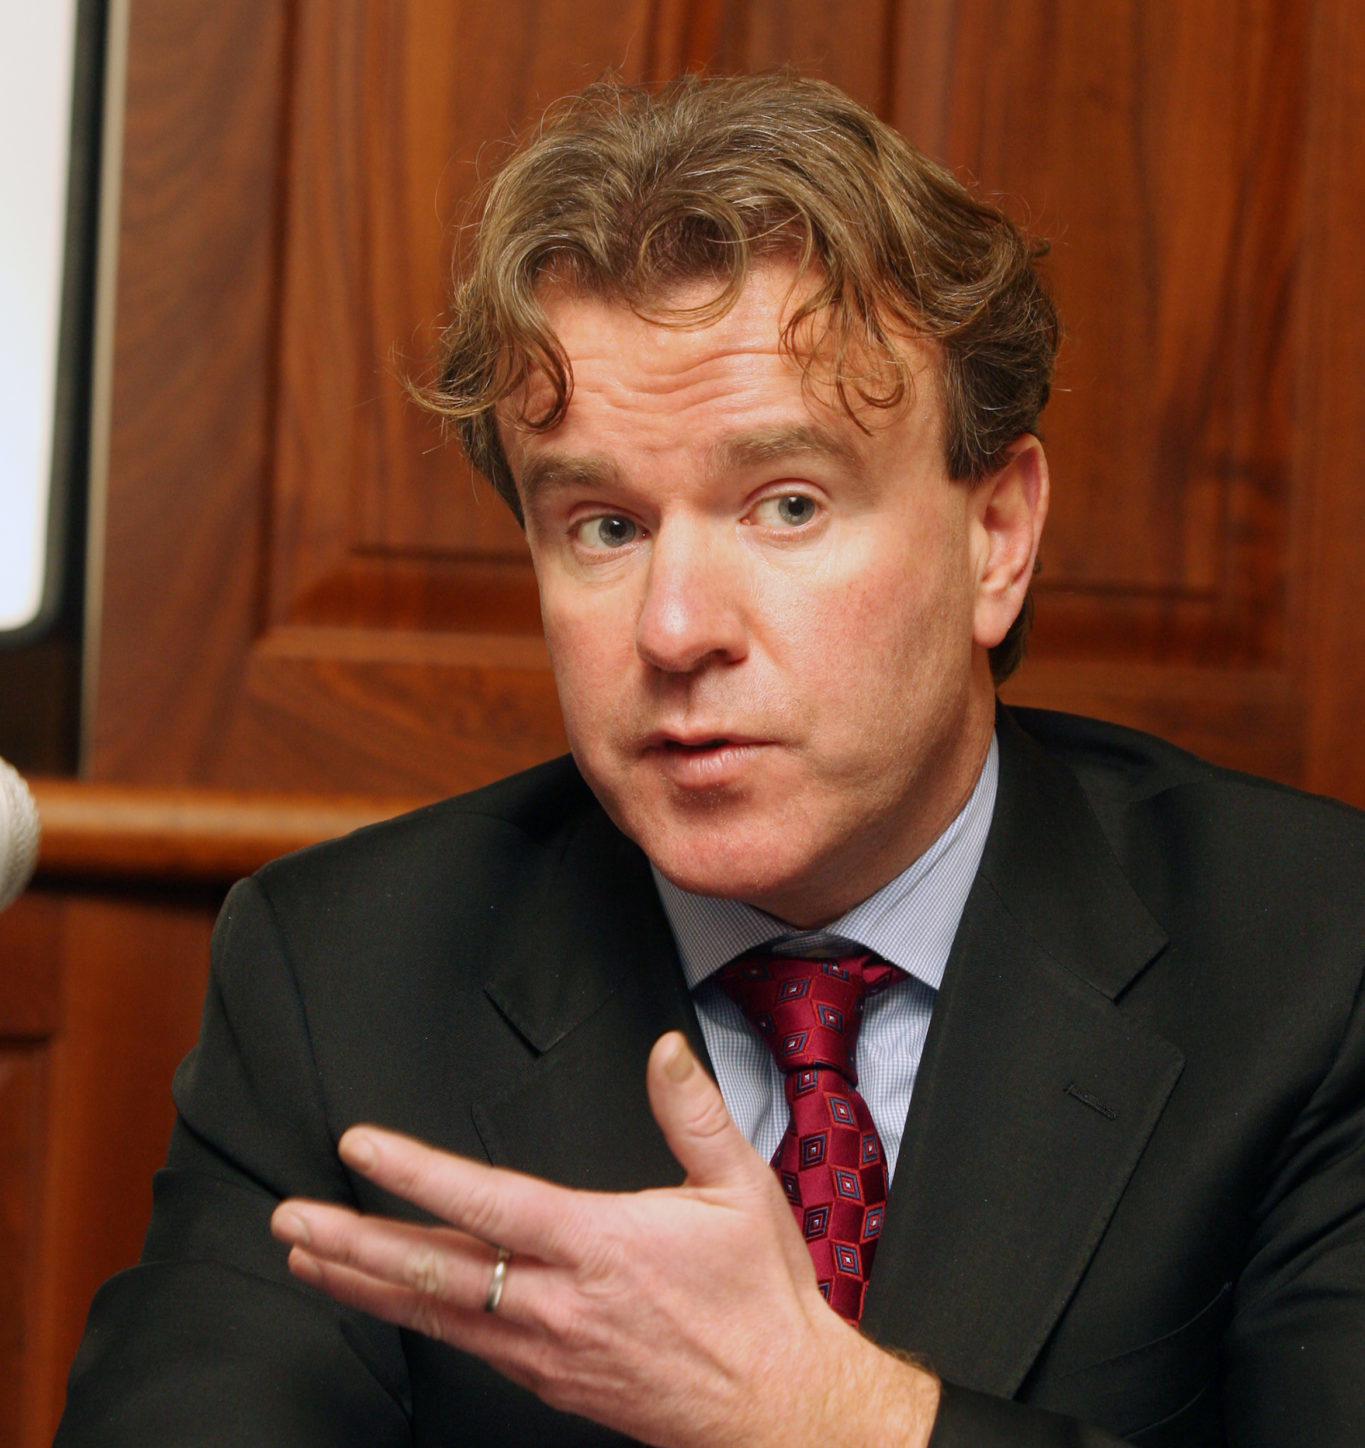 Tom Clonan speaking to the media at Buswells Hotel, Dublin in 2010